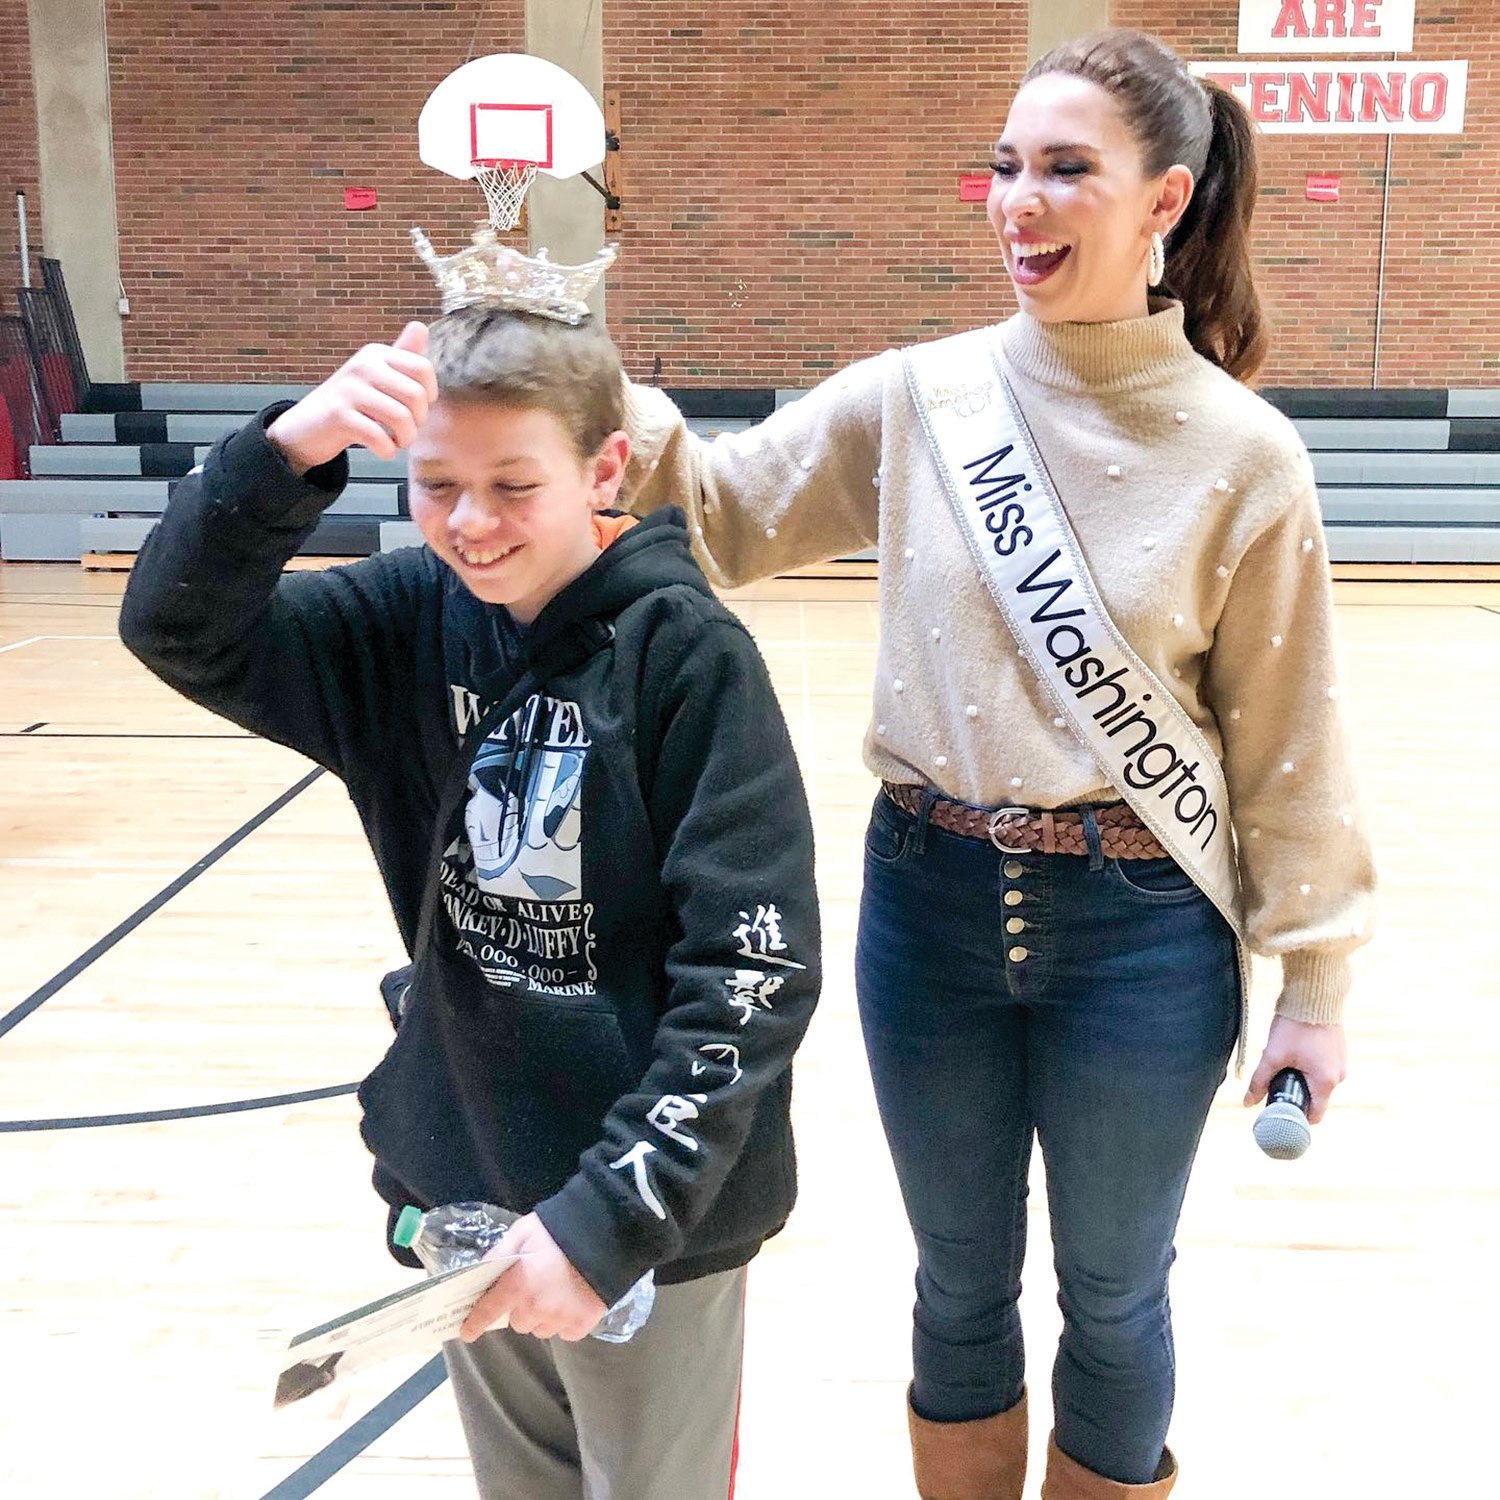 Miss Washington Maddie Louder crowns a student during a visit to the Tenino School District on Tuesday. “A full day at Tenino Middle School talking about stress, anxiety and coping,” she wrote after the event.  “Thanks for having me, Tenino!”